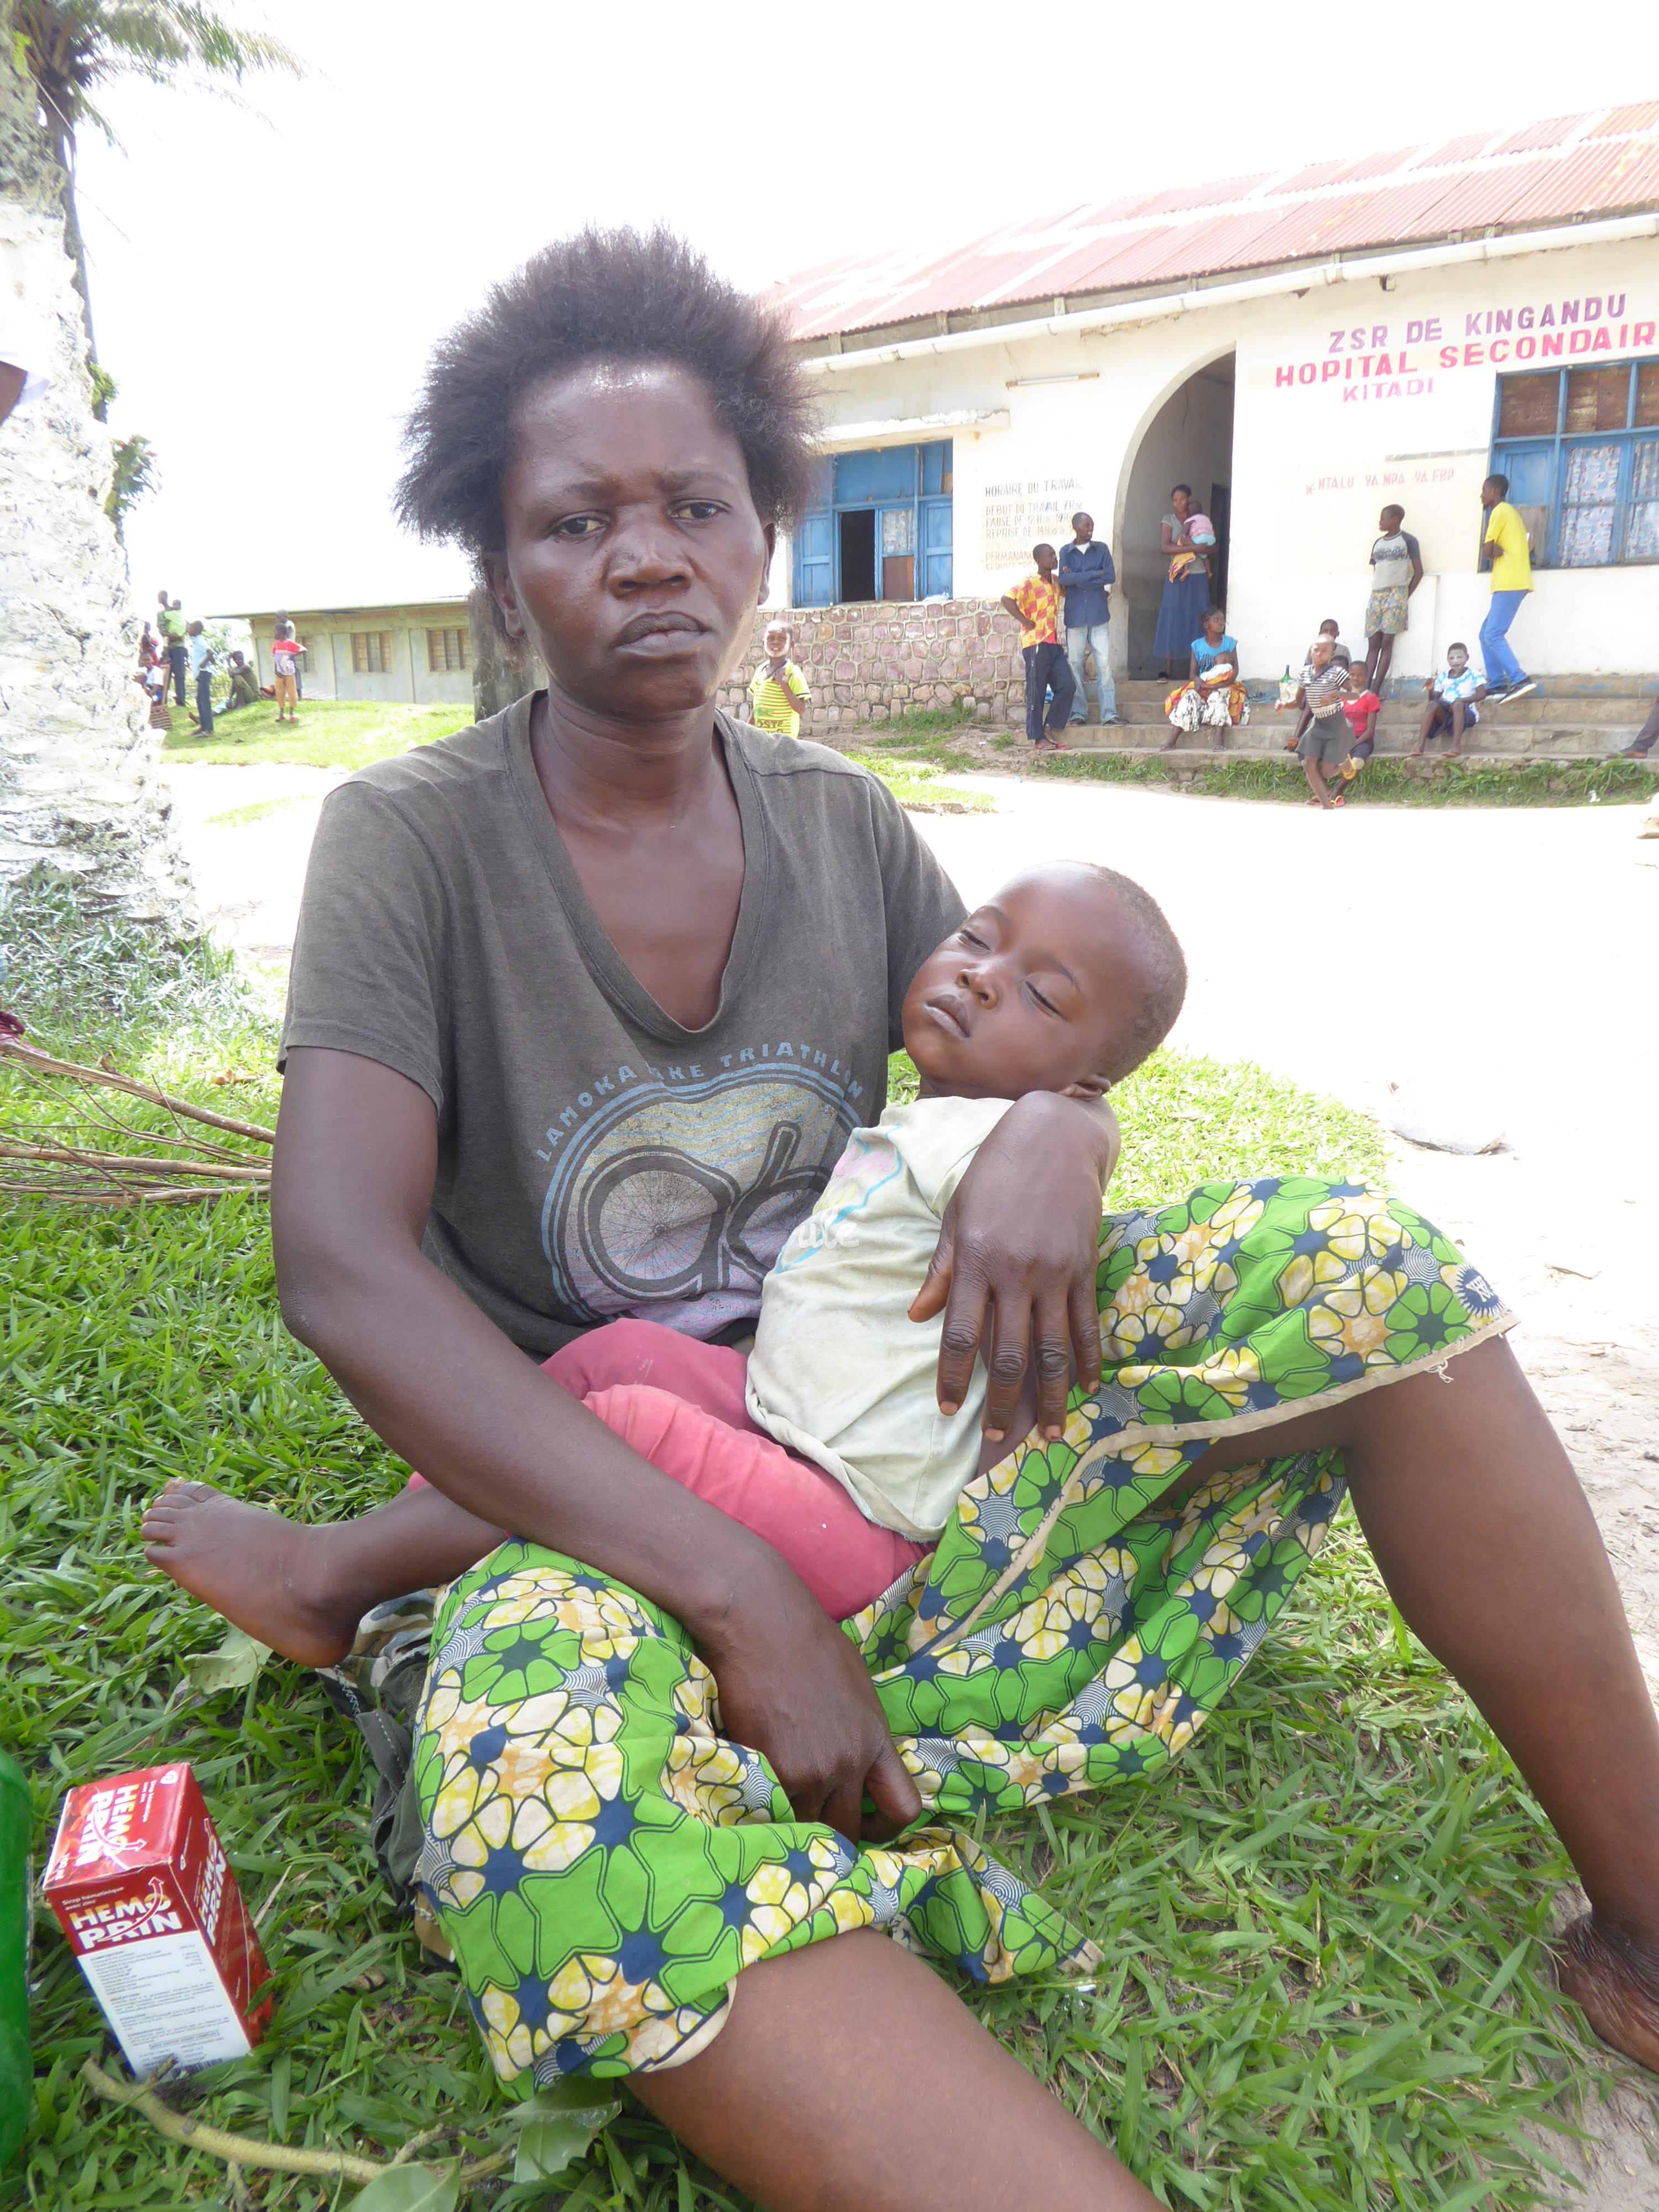 Annette Kenzi with son at Kigandu health center